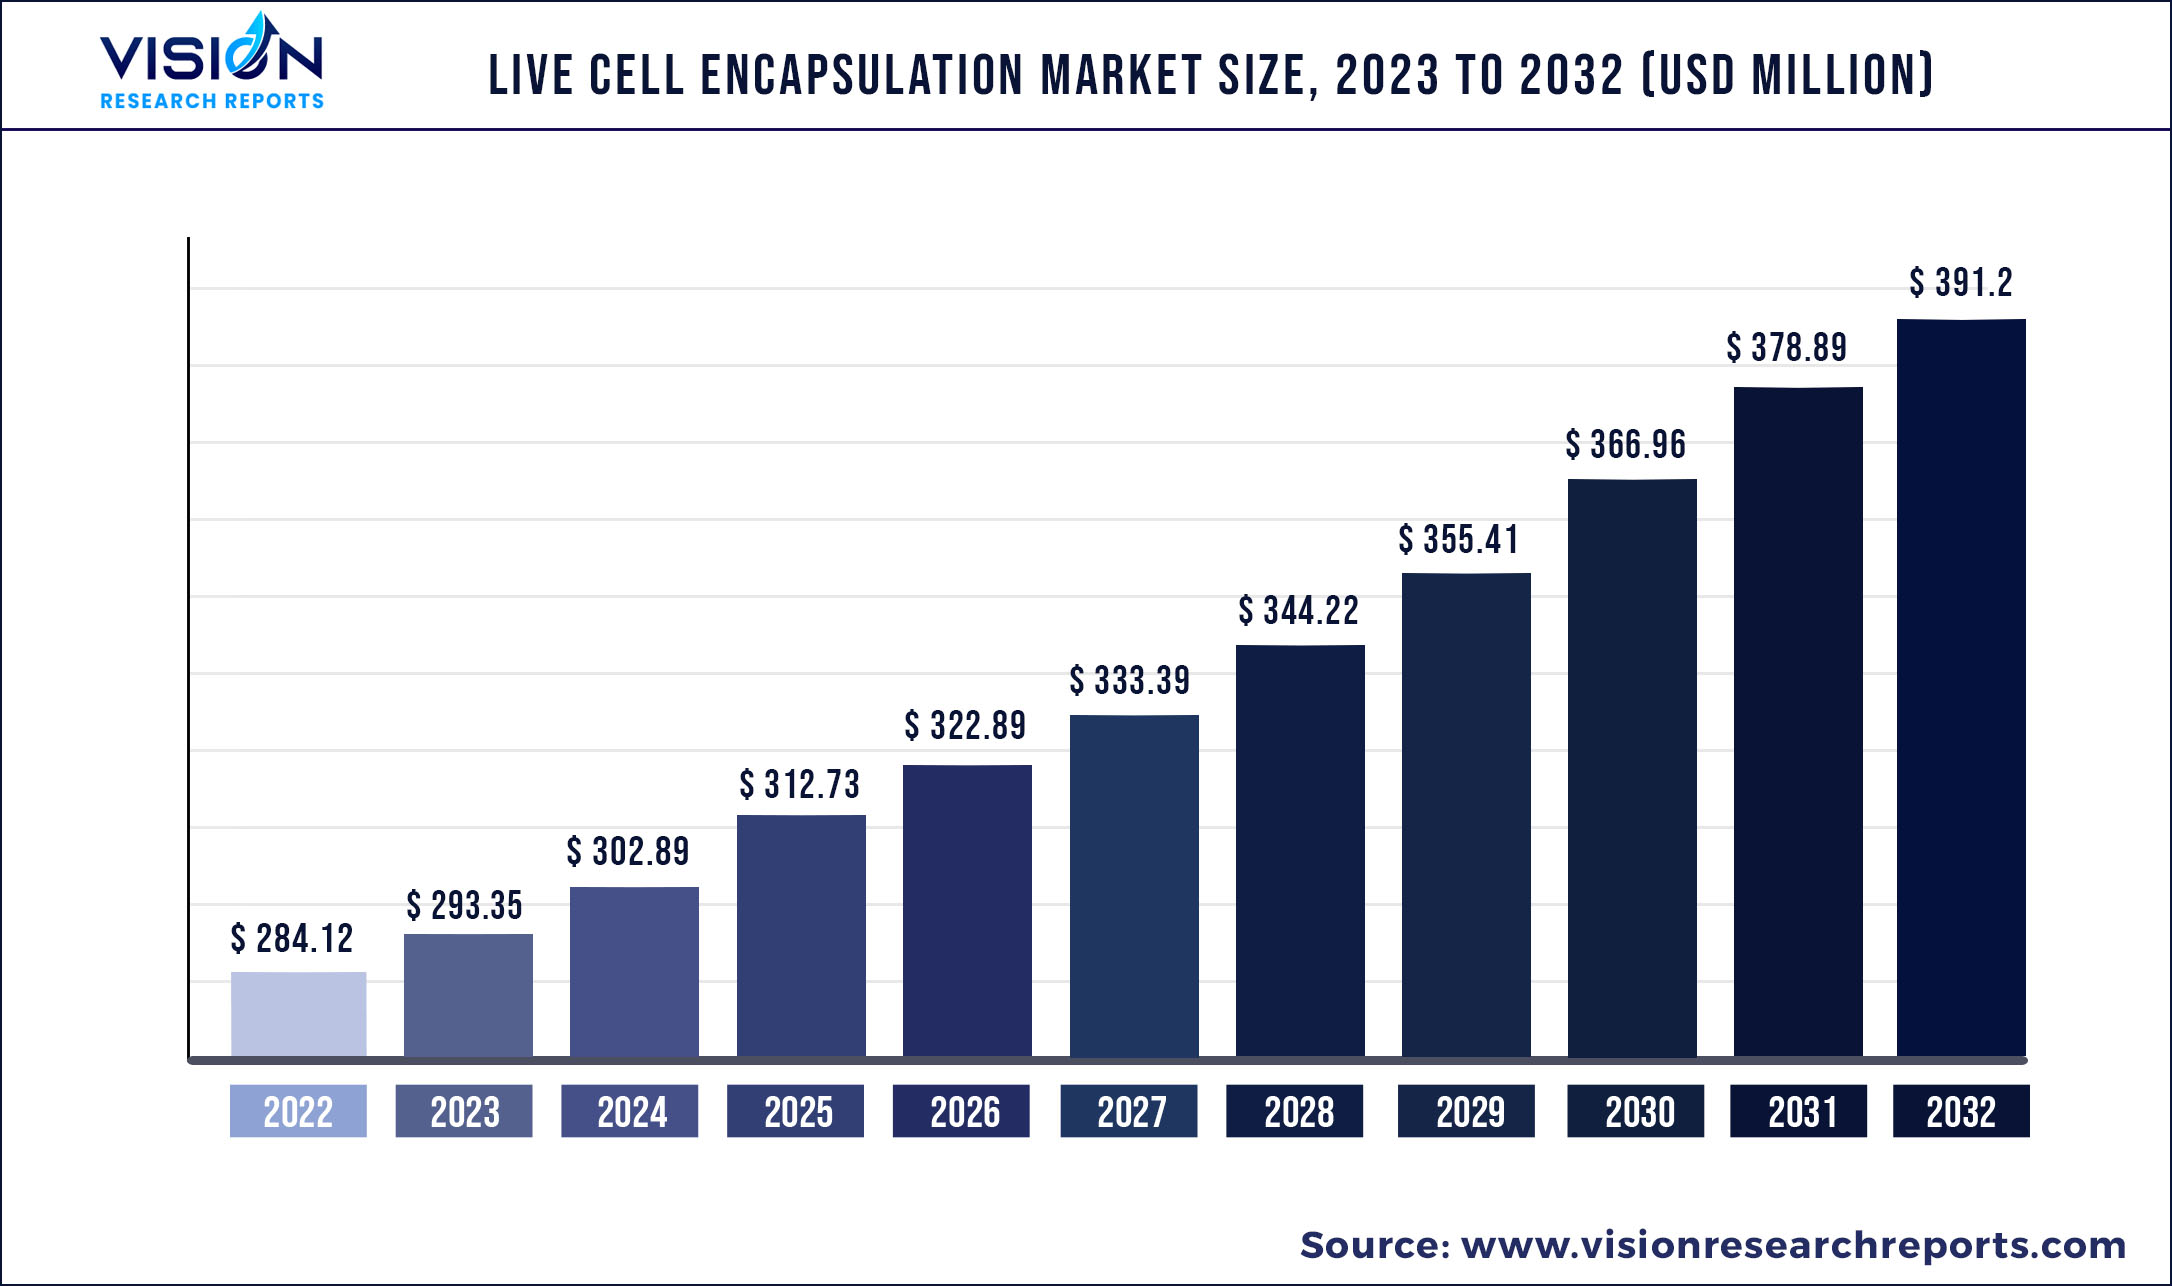 Live Cell Encapsulation Market Size 2023 to 2032